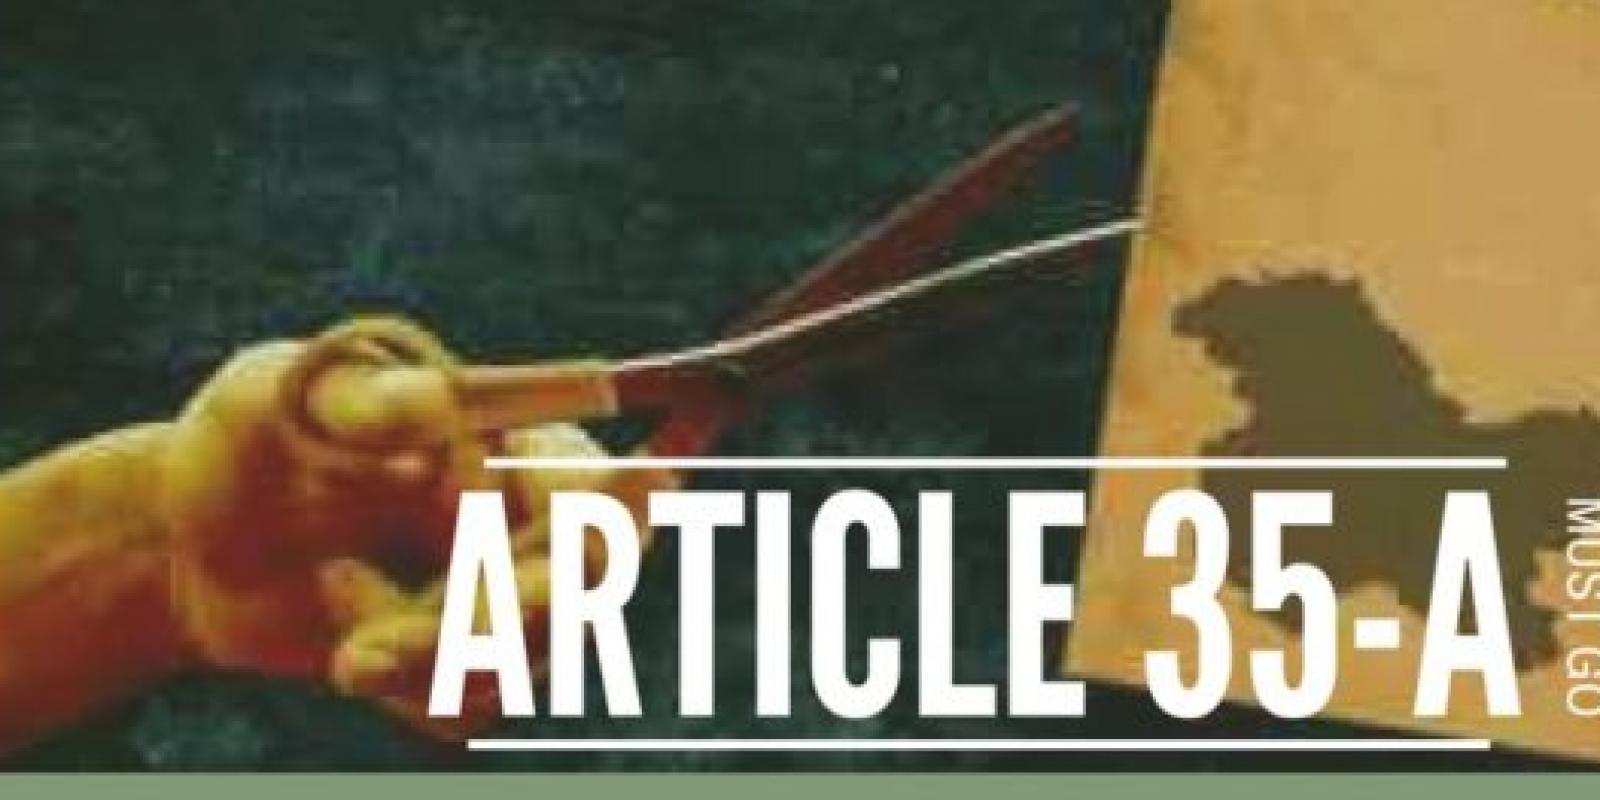 Article 35-A